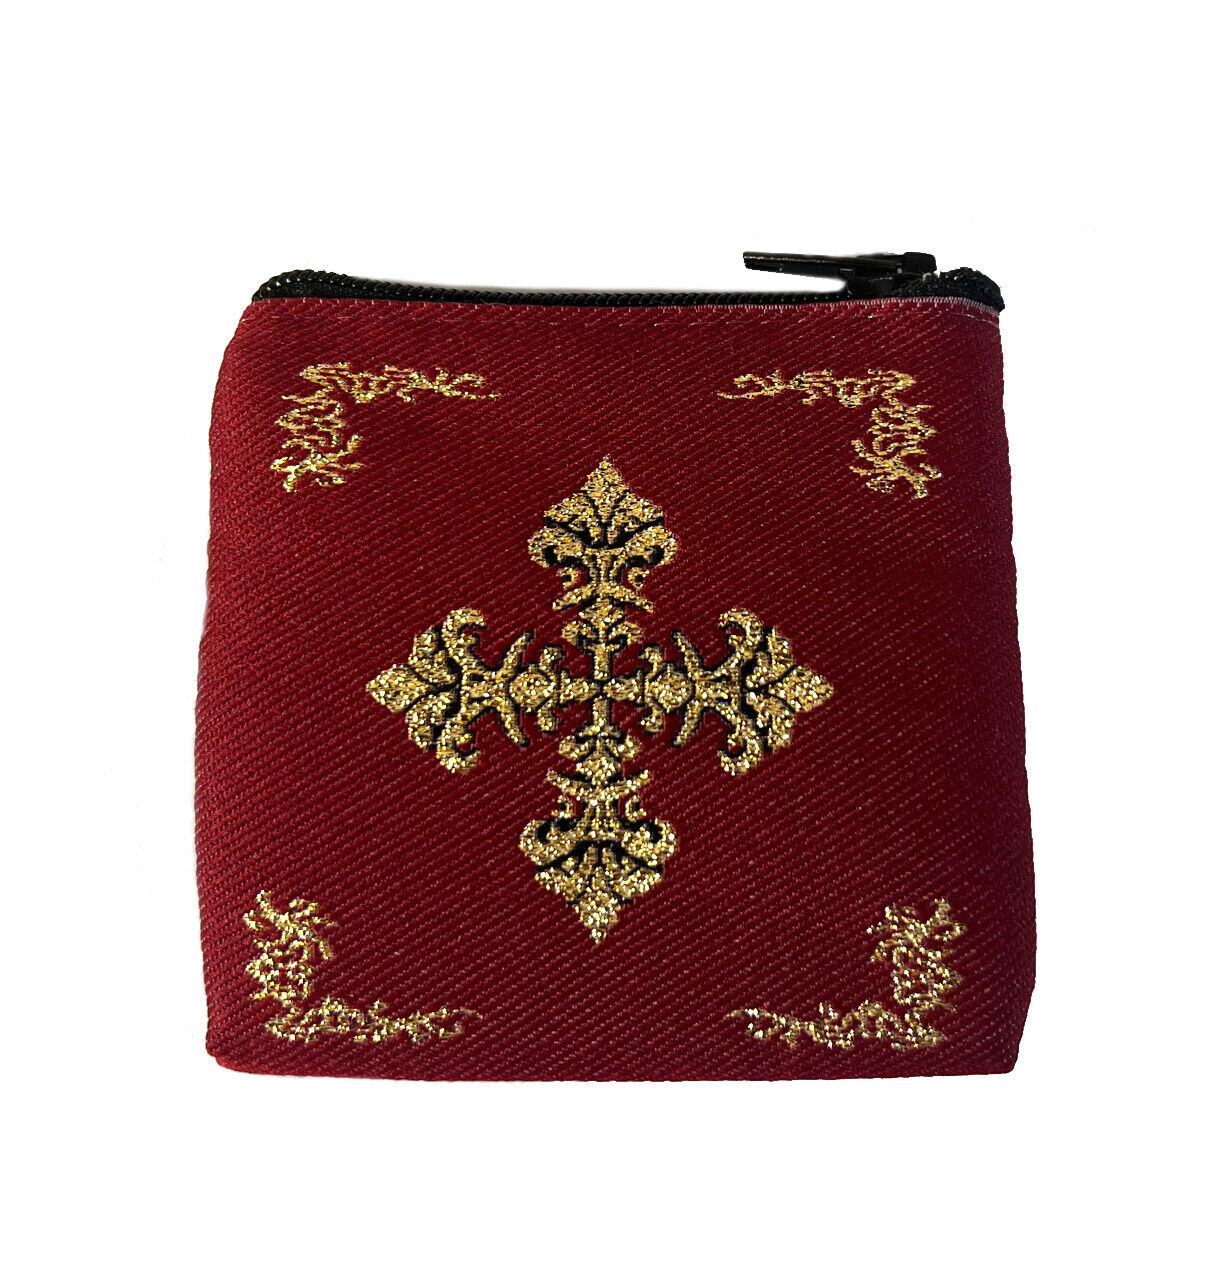 Rosary Pouch Jewelry SMALL Pouch With Cross Cloth Tapestry 2 Sided With Zipper